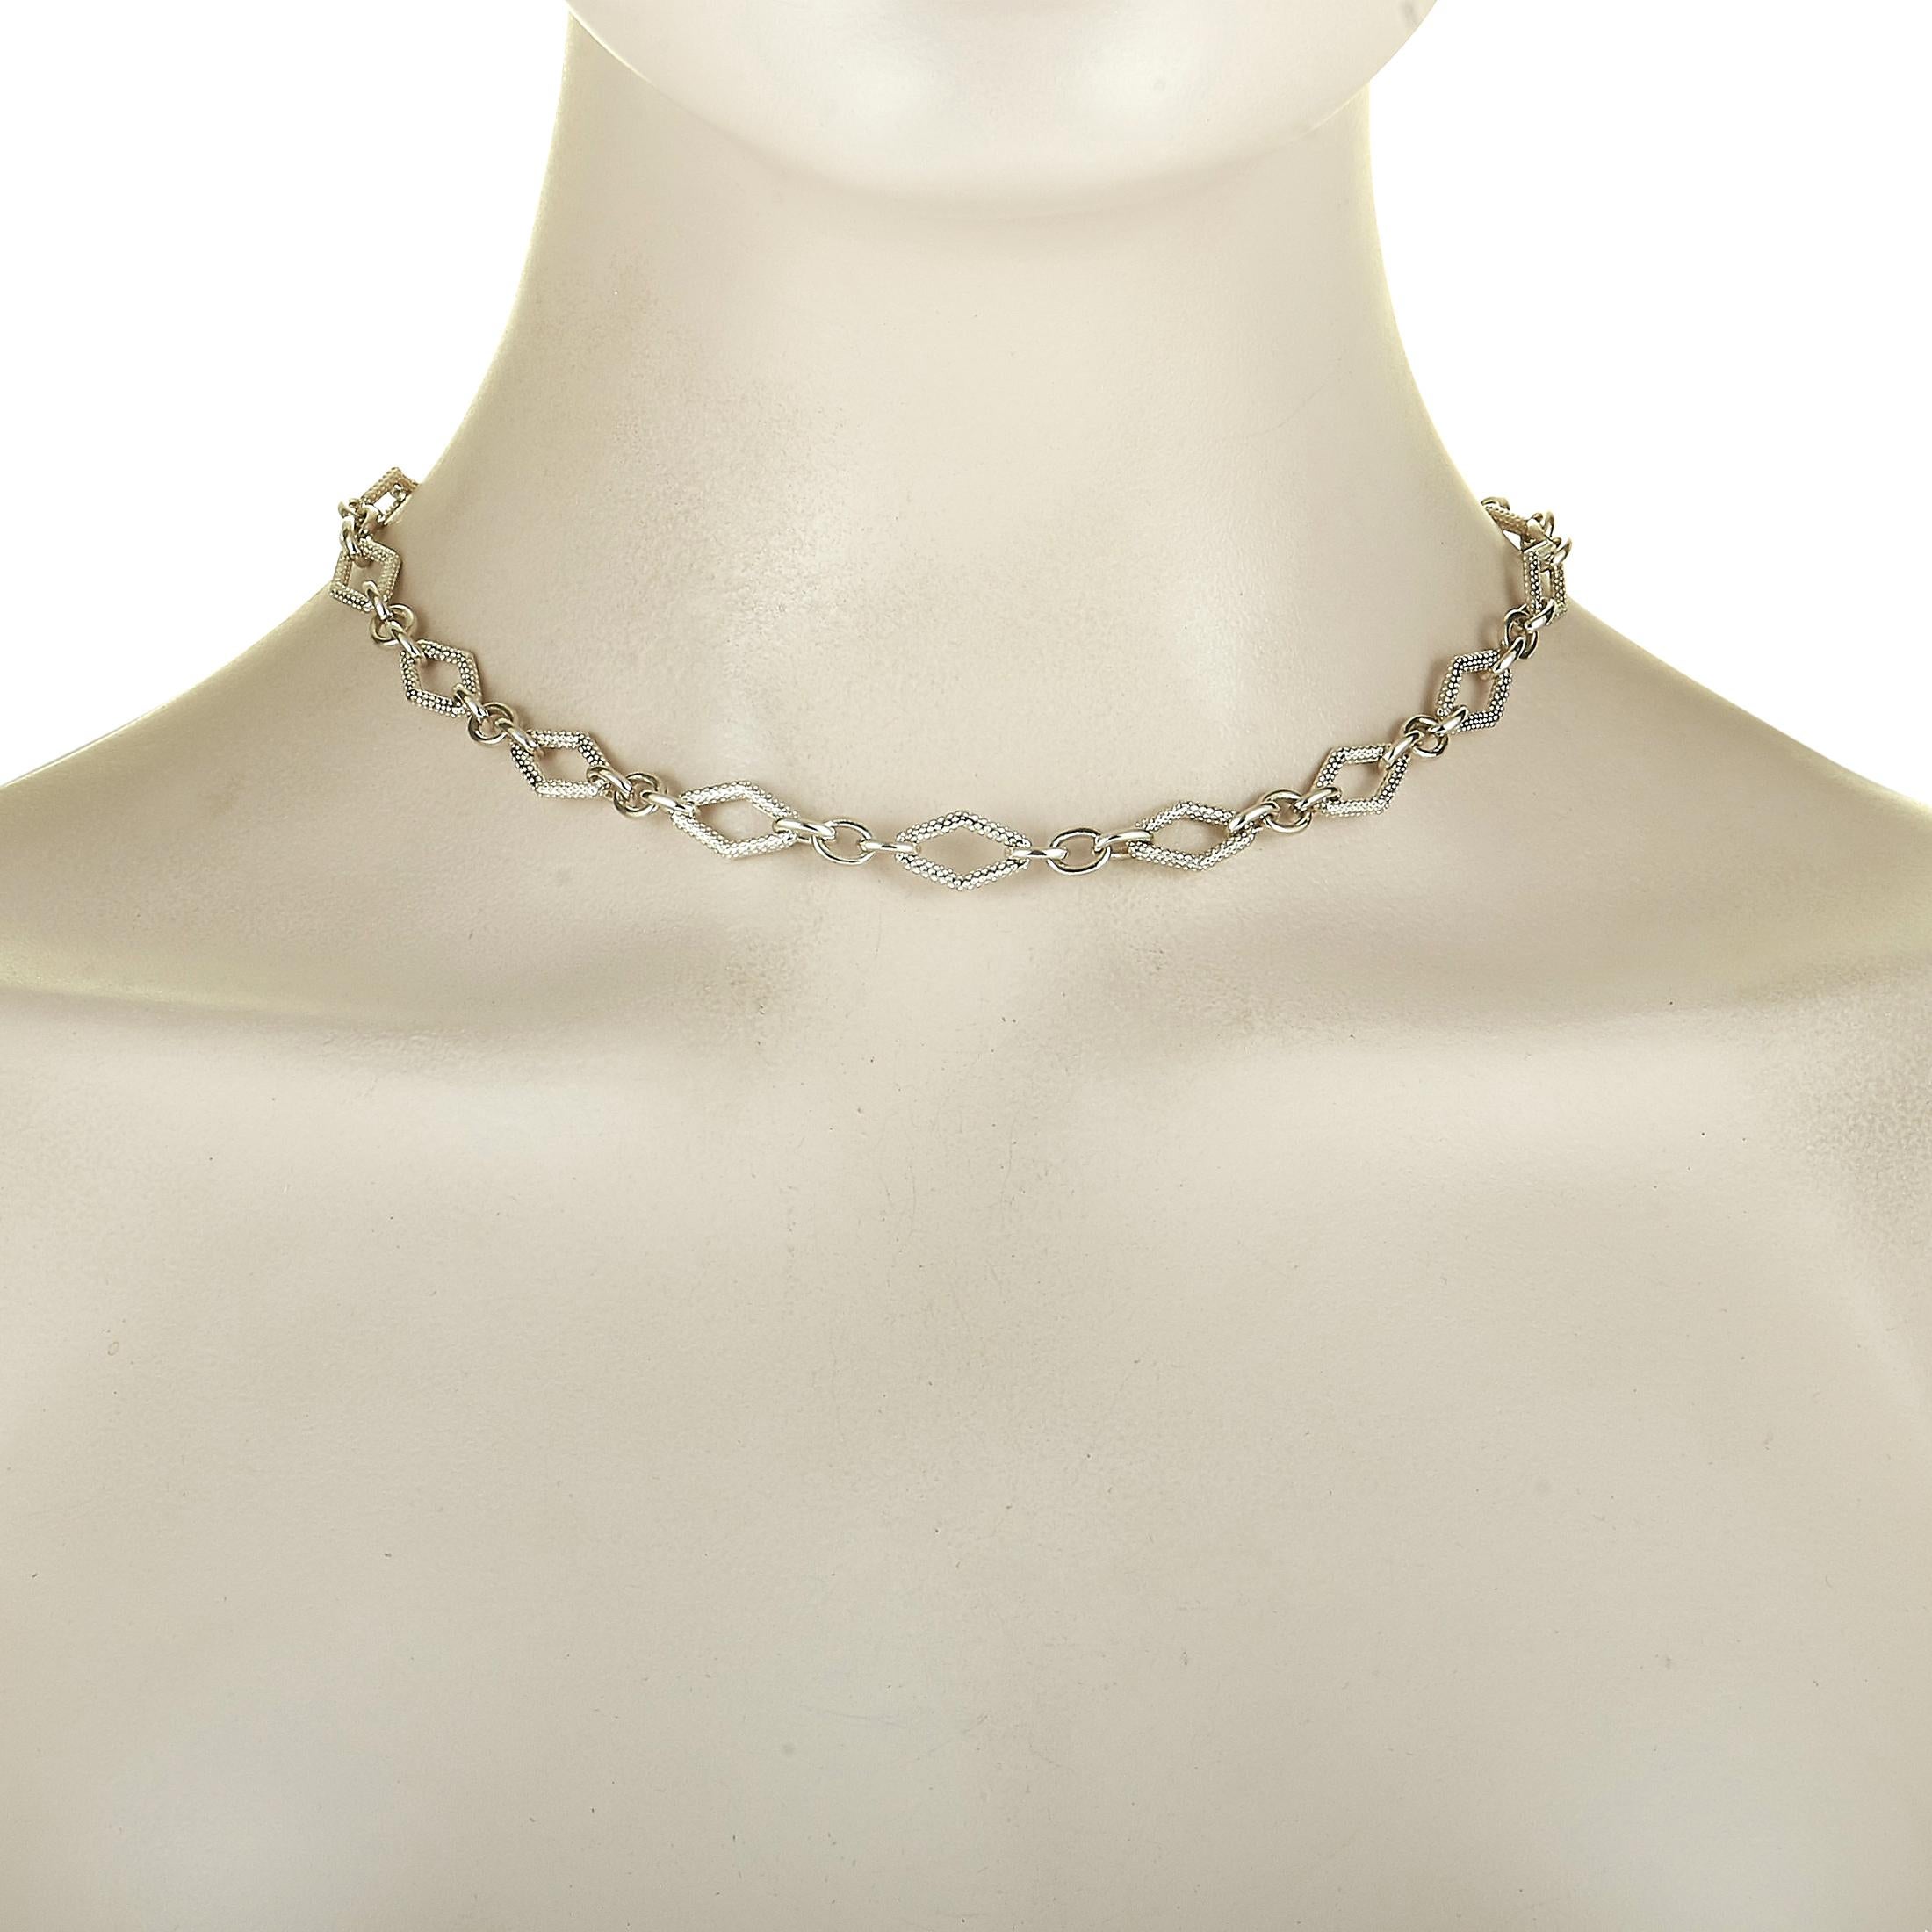 This Charles Krypell necklace is made out of 14K white gold and silver and embellished with a total of 0.10 carats of diamonds. The necklace weighs 37.2 grams and measures 16” in length.

Offered in brand new condition, this jewelry piece includes a